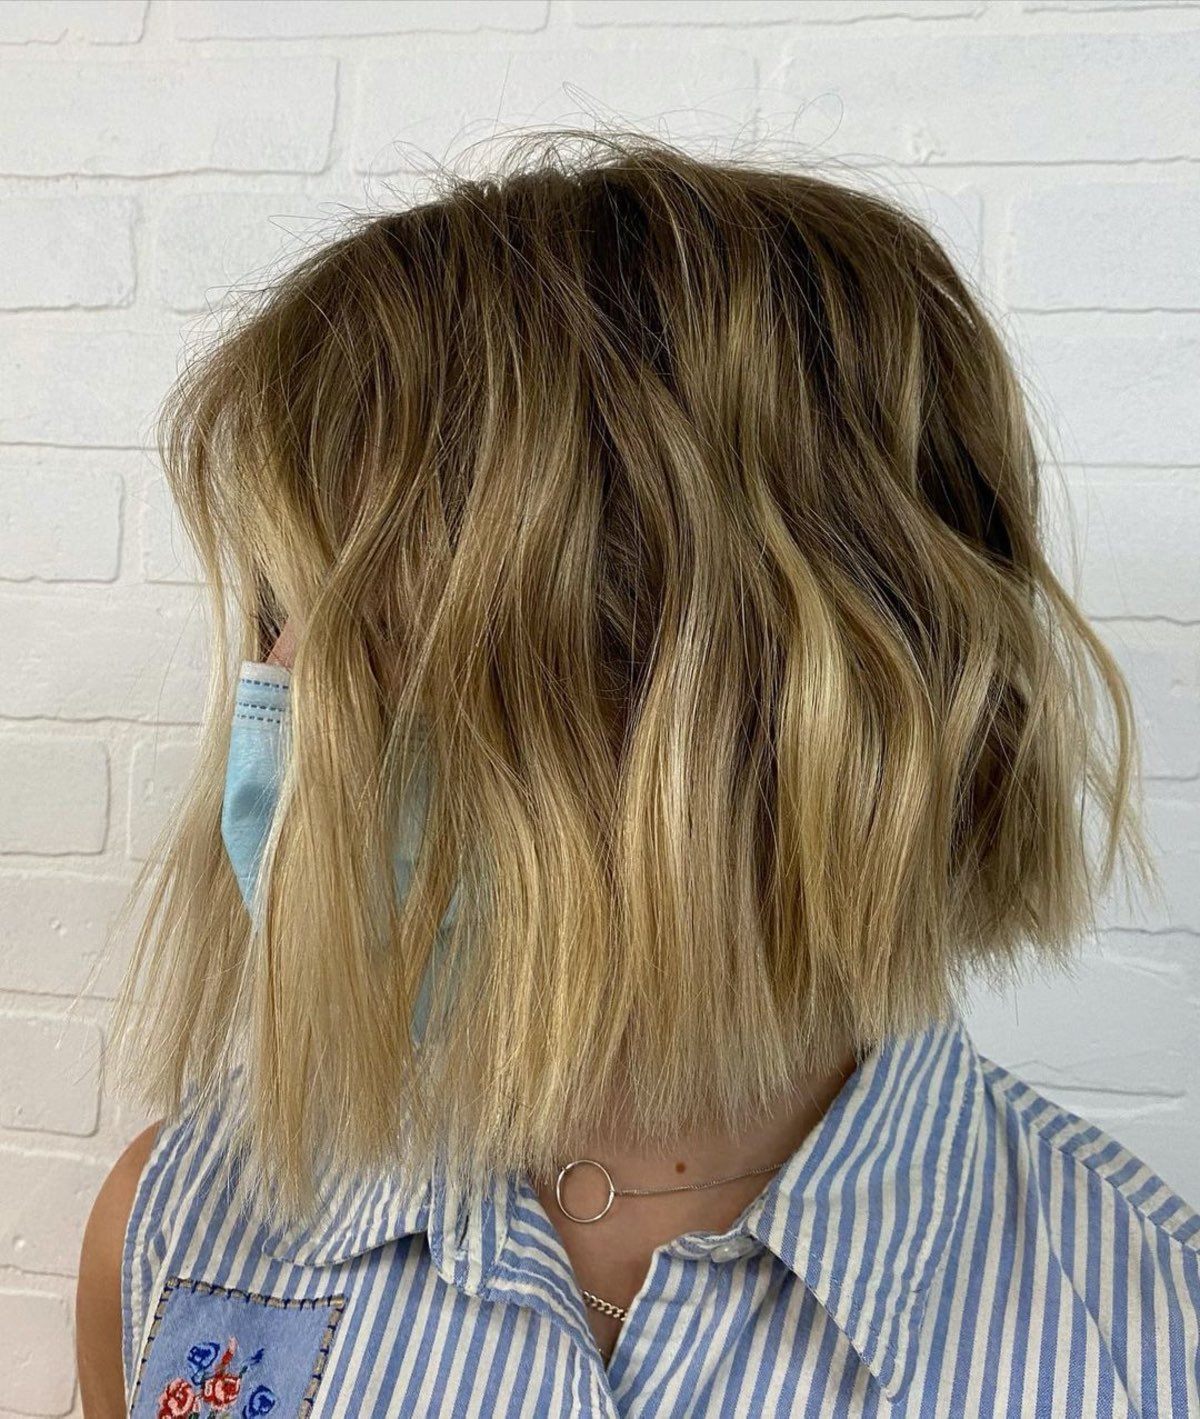 24 Best Short Blunt Bob Haircuts Ideas For Women of All Ages